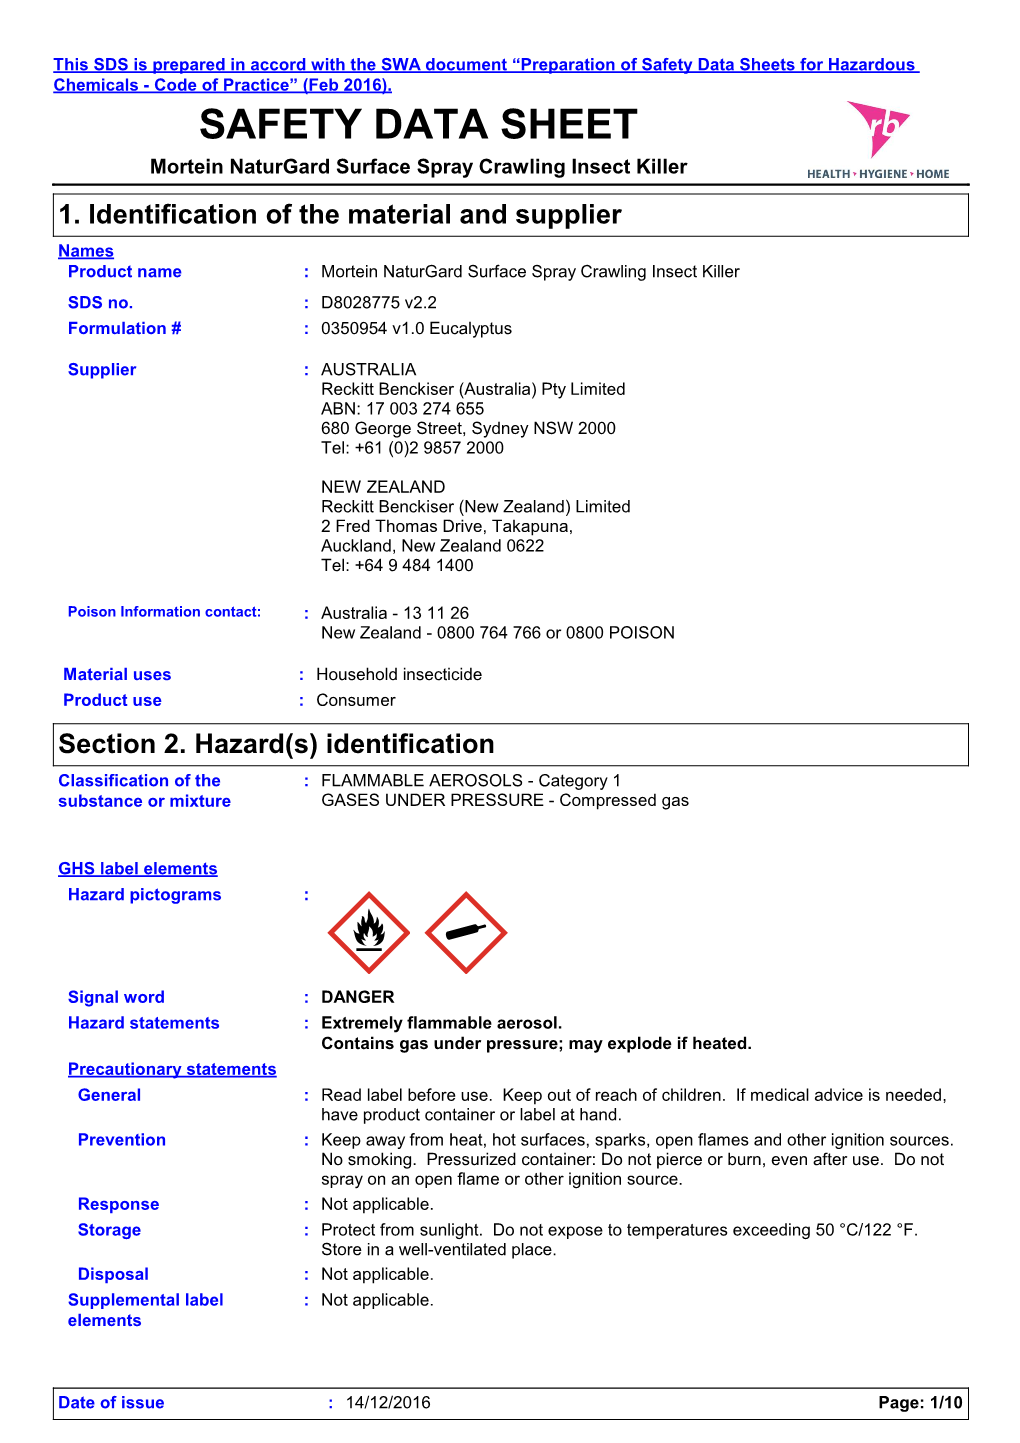 Safety Data Sheets for Hazardous Chemicals - Code of Practice” (Feb 2016)